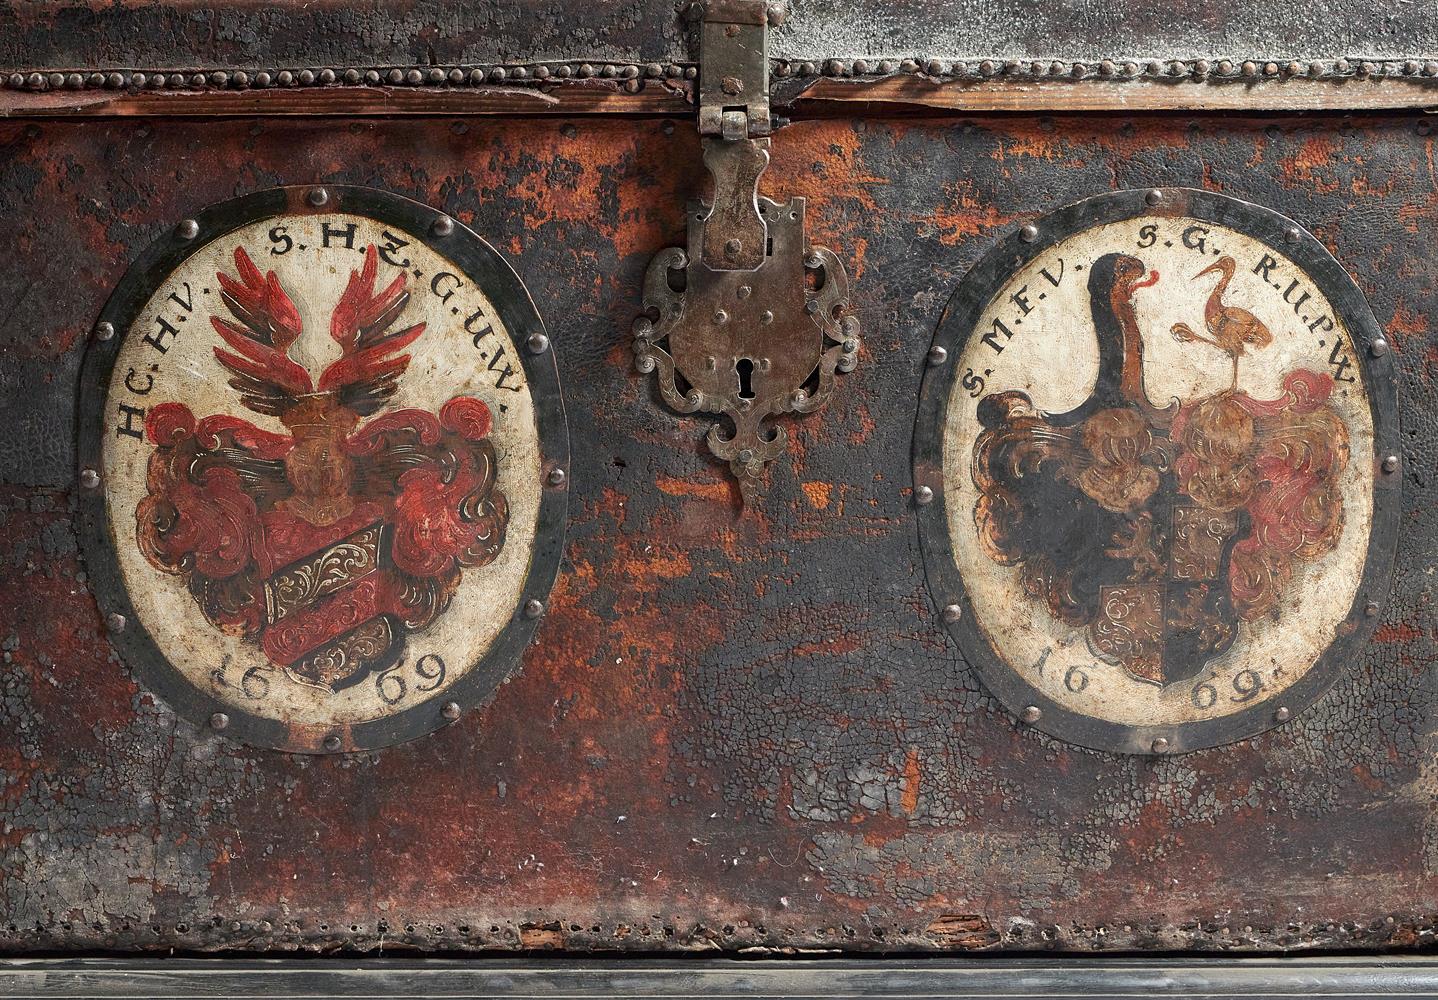 A PAIR OF GERMAN IRON MOUNTED LEATHER CHESTS, LATE 17TH CENTURY - Image 5 of 6